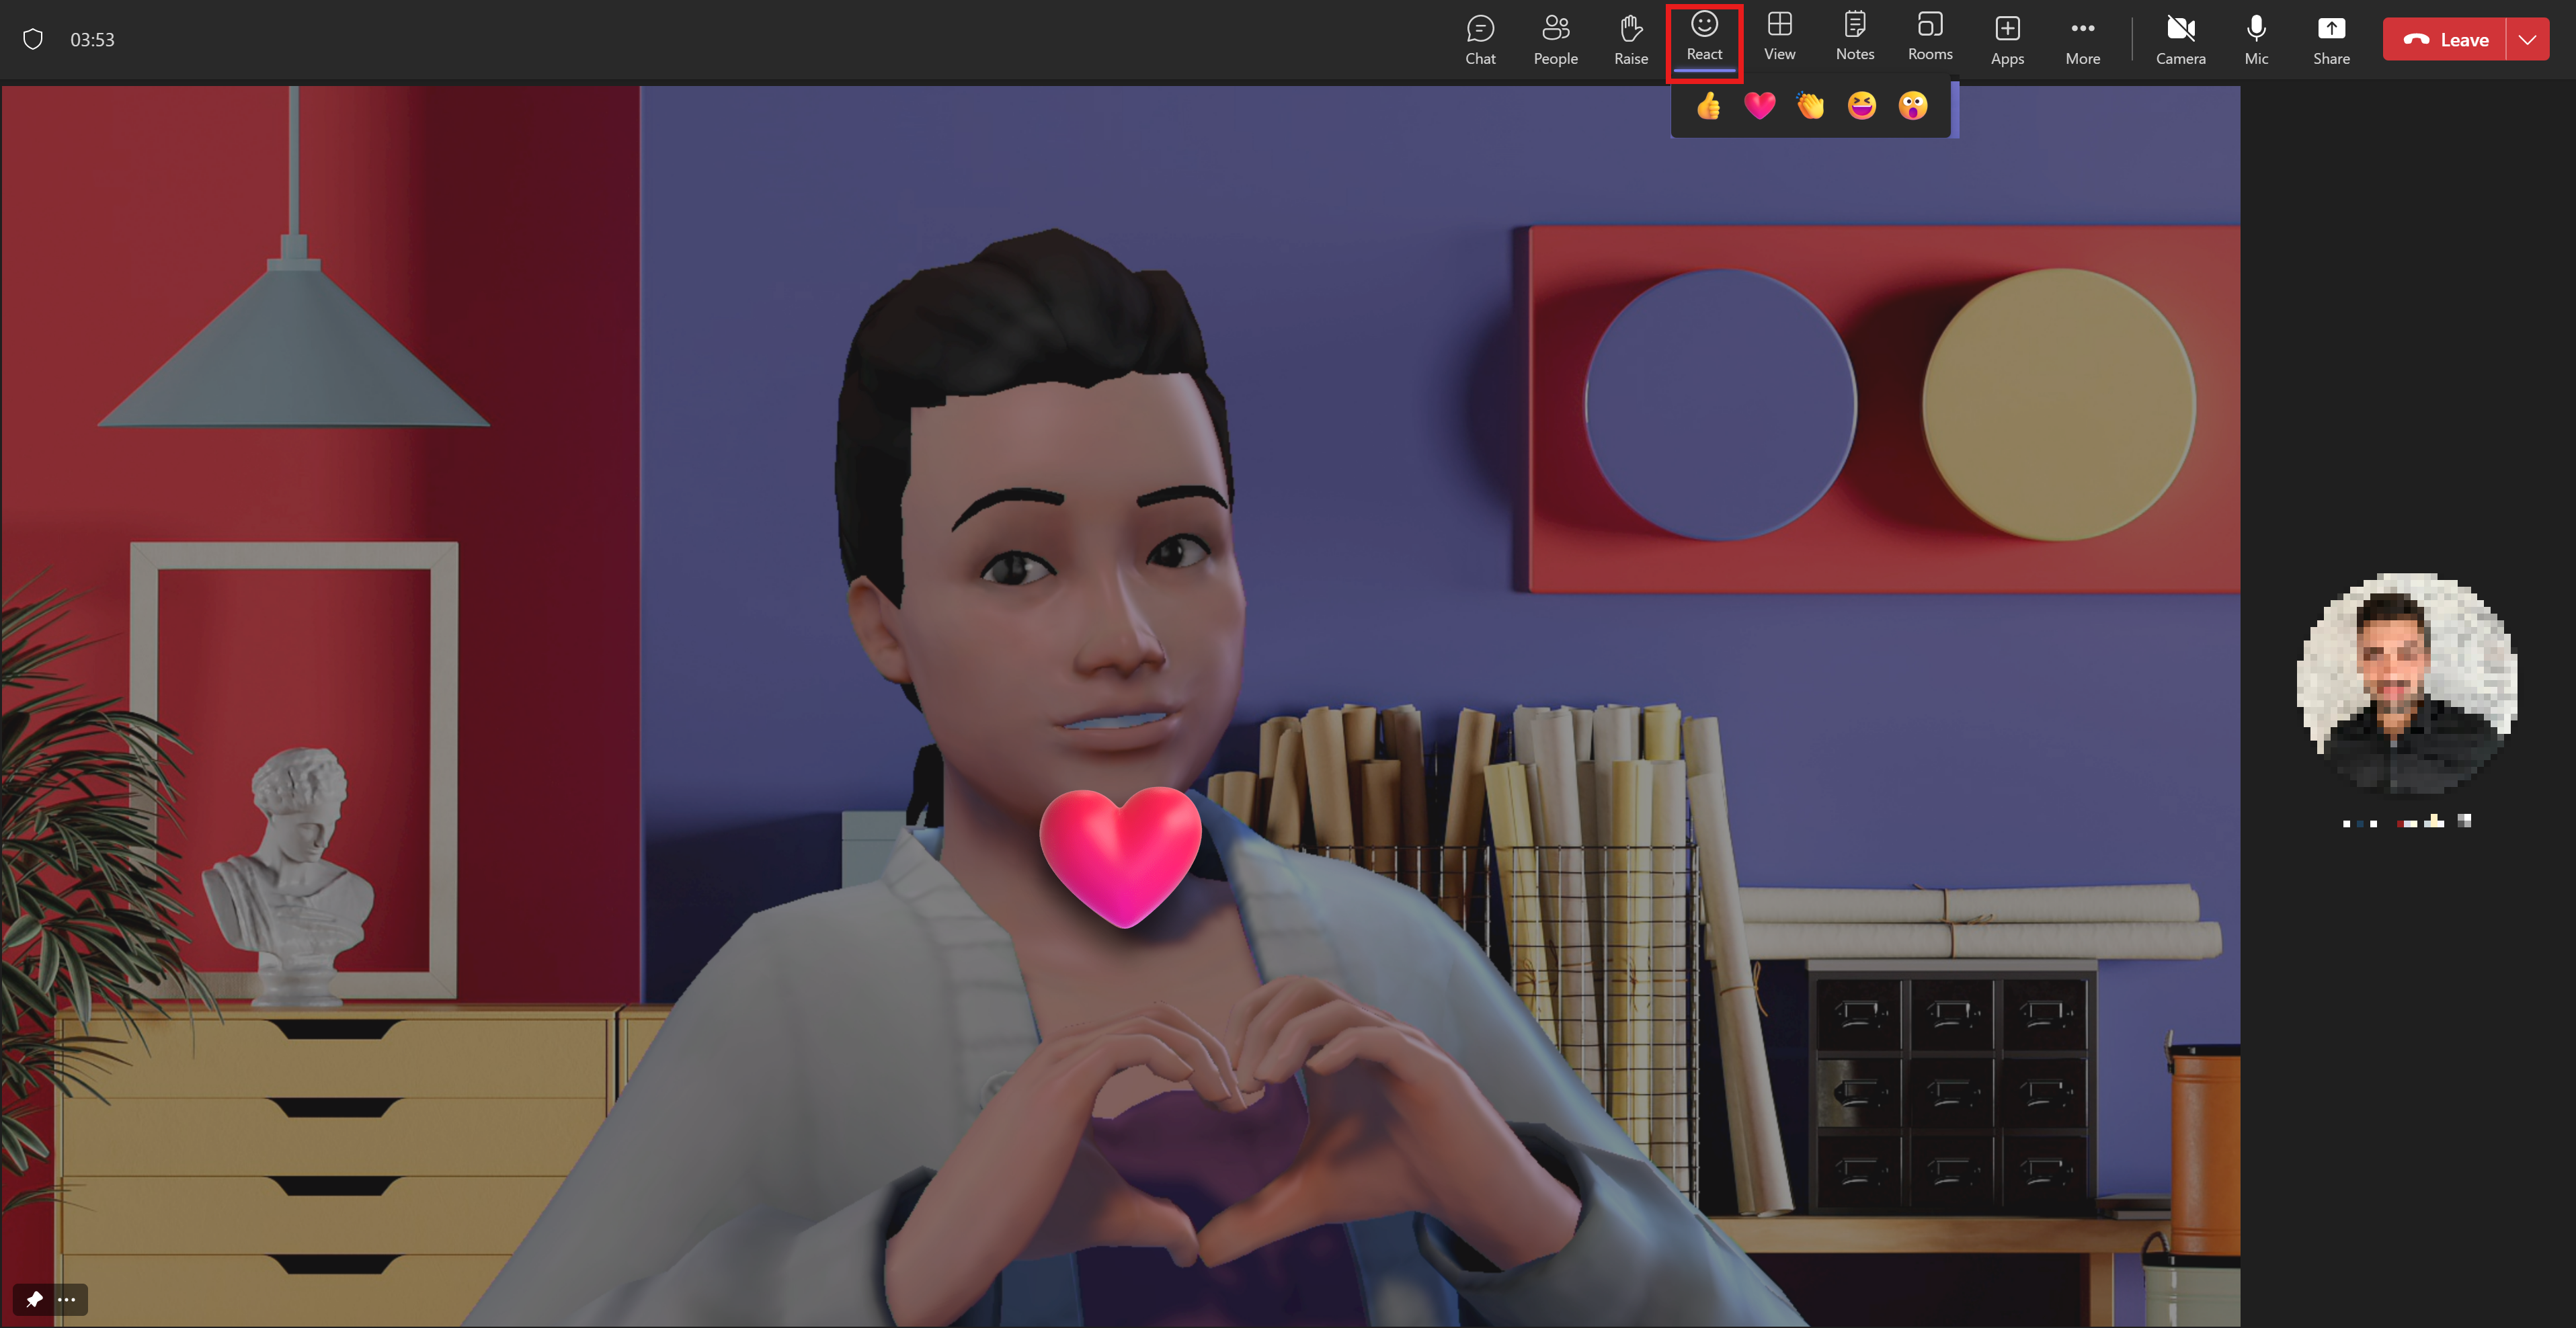 An avatar shows her love by making a heart with her hands